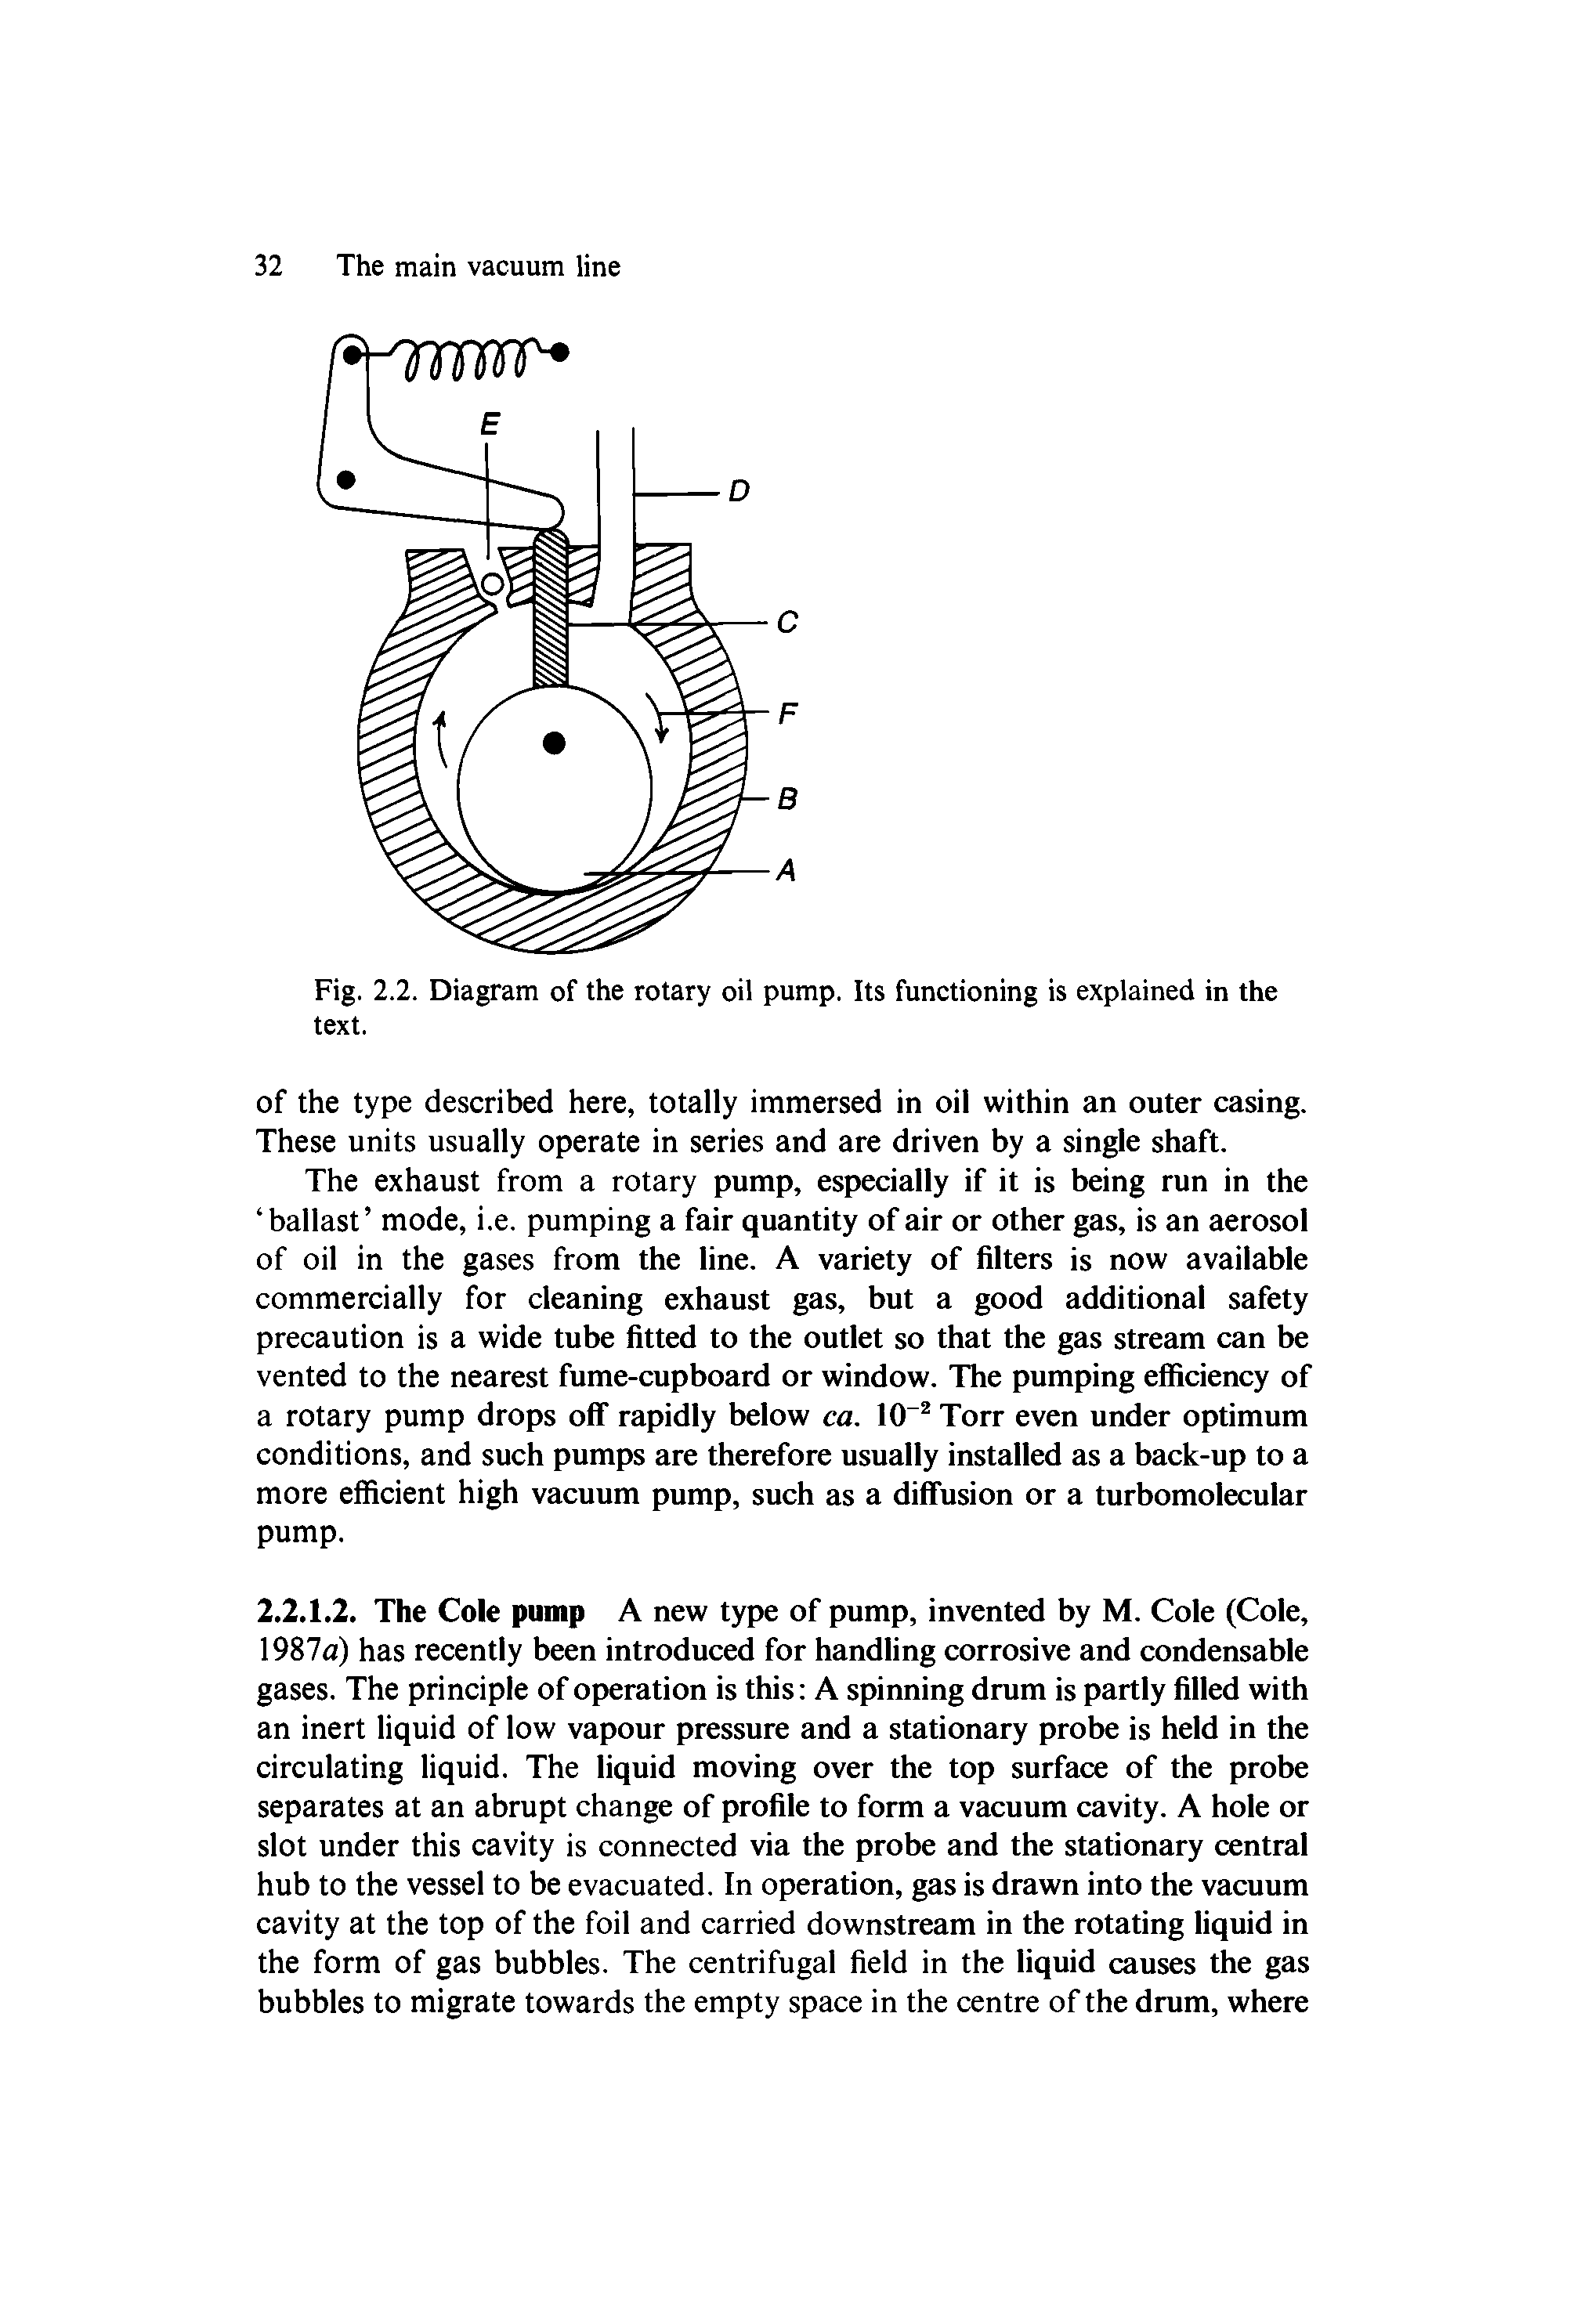 Fig. 2.2. Diagram of the rotary oil pump. Its functioning is explained in the text.